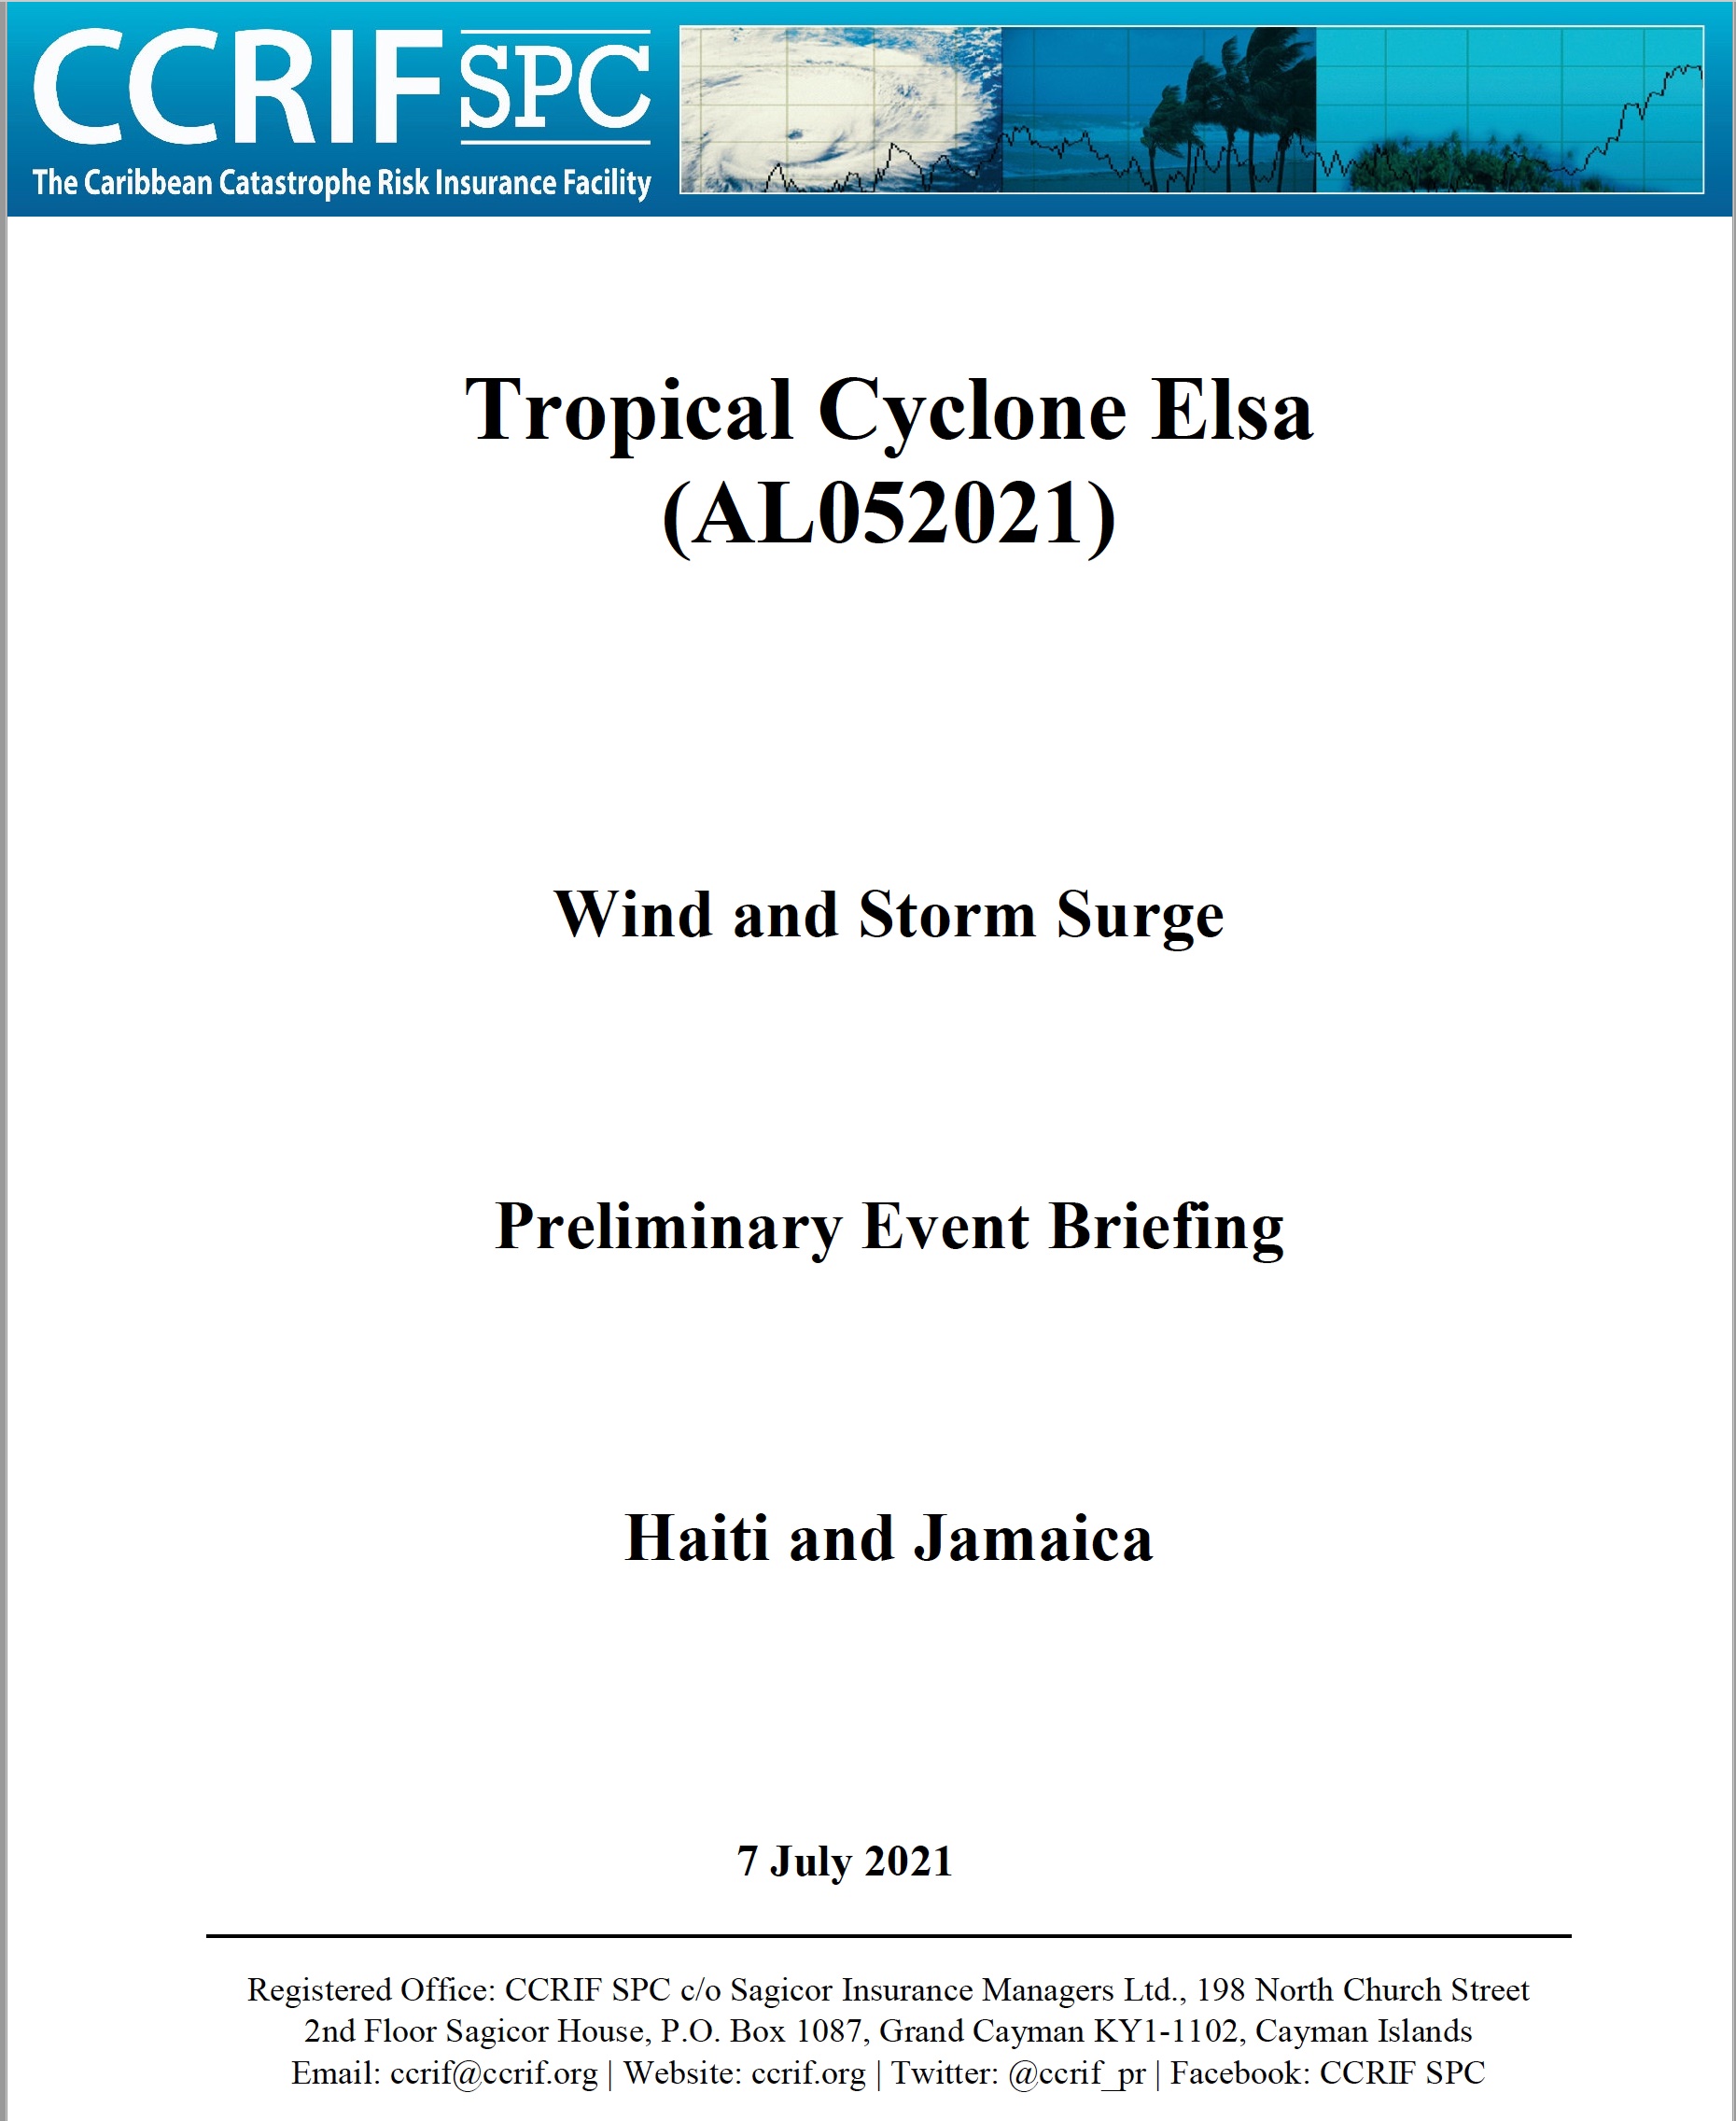 Preliminary Event Briefing - TC Elsa - Wind and Storm Surge - Haiti and Jamaica - July 7 2021